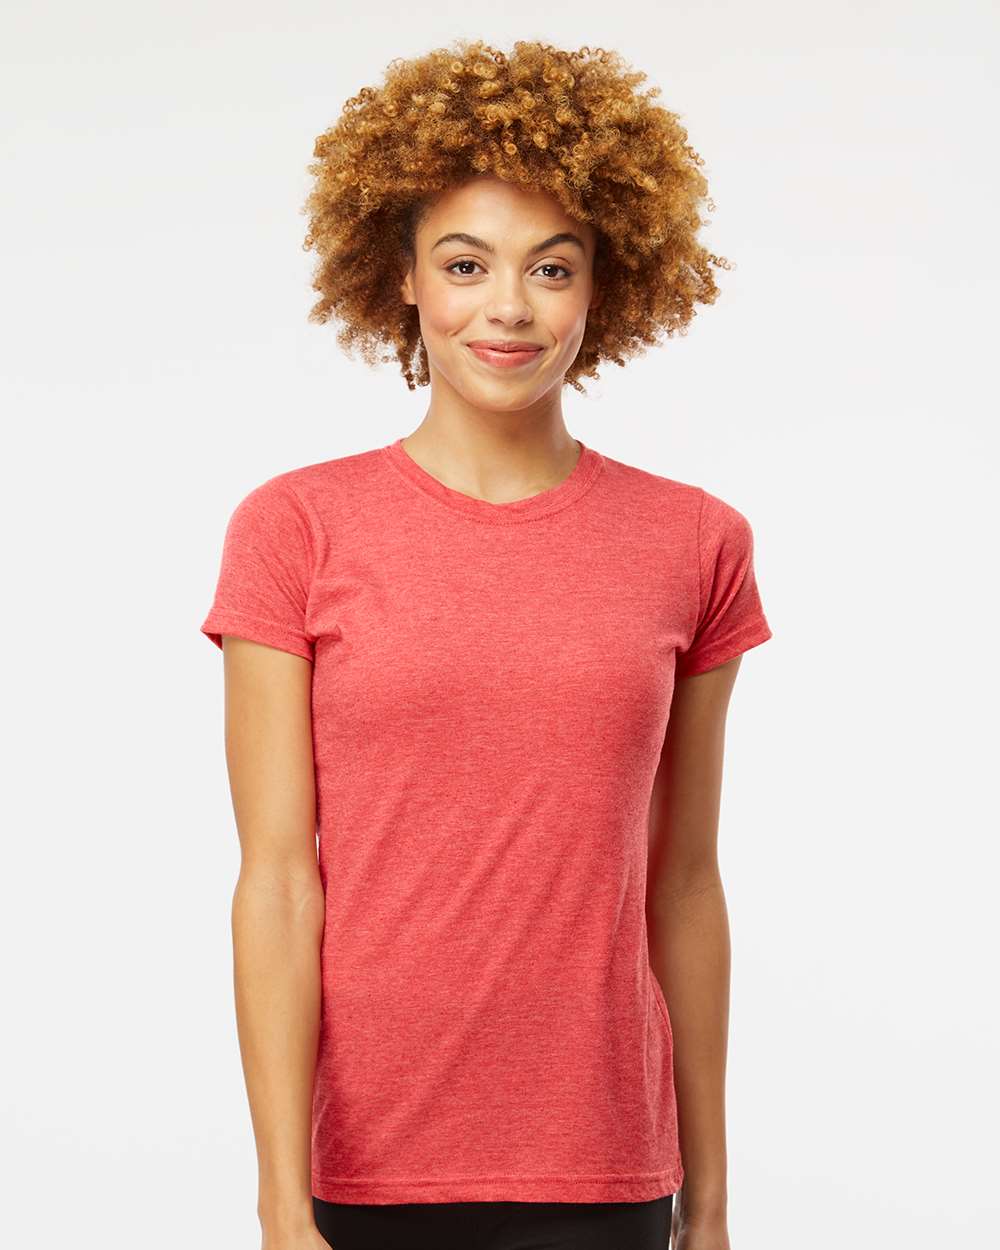 M&O Women’s Deluxe Blend T-Shirt #3540 Heather Red